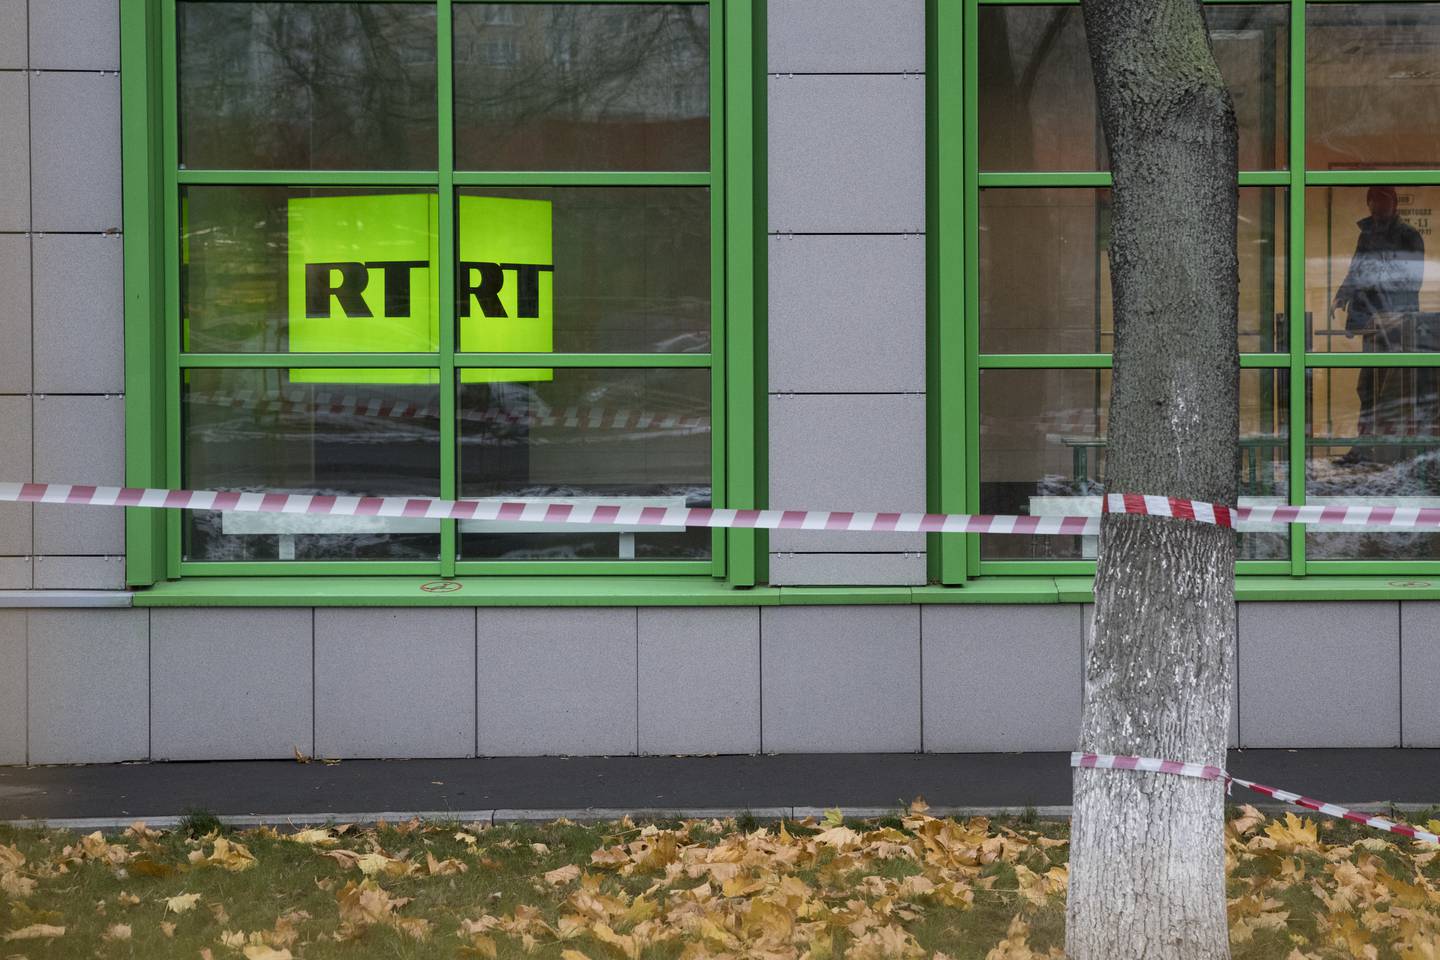 Russian state-owned television station RT logo is seen at the window of the company's office in Moscow, Russia, Friday, Oct. 27, 2017. Twitter said on Thursday it would ban ads from RT and Sputnik, two state-sponsored Russian news outlets that the U.S. intelligence community has said tried to interfere with the 2016 U.S. presidential election. (AP Photo/Pavel Golovkin)